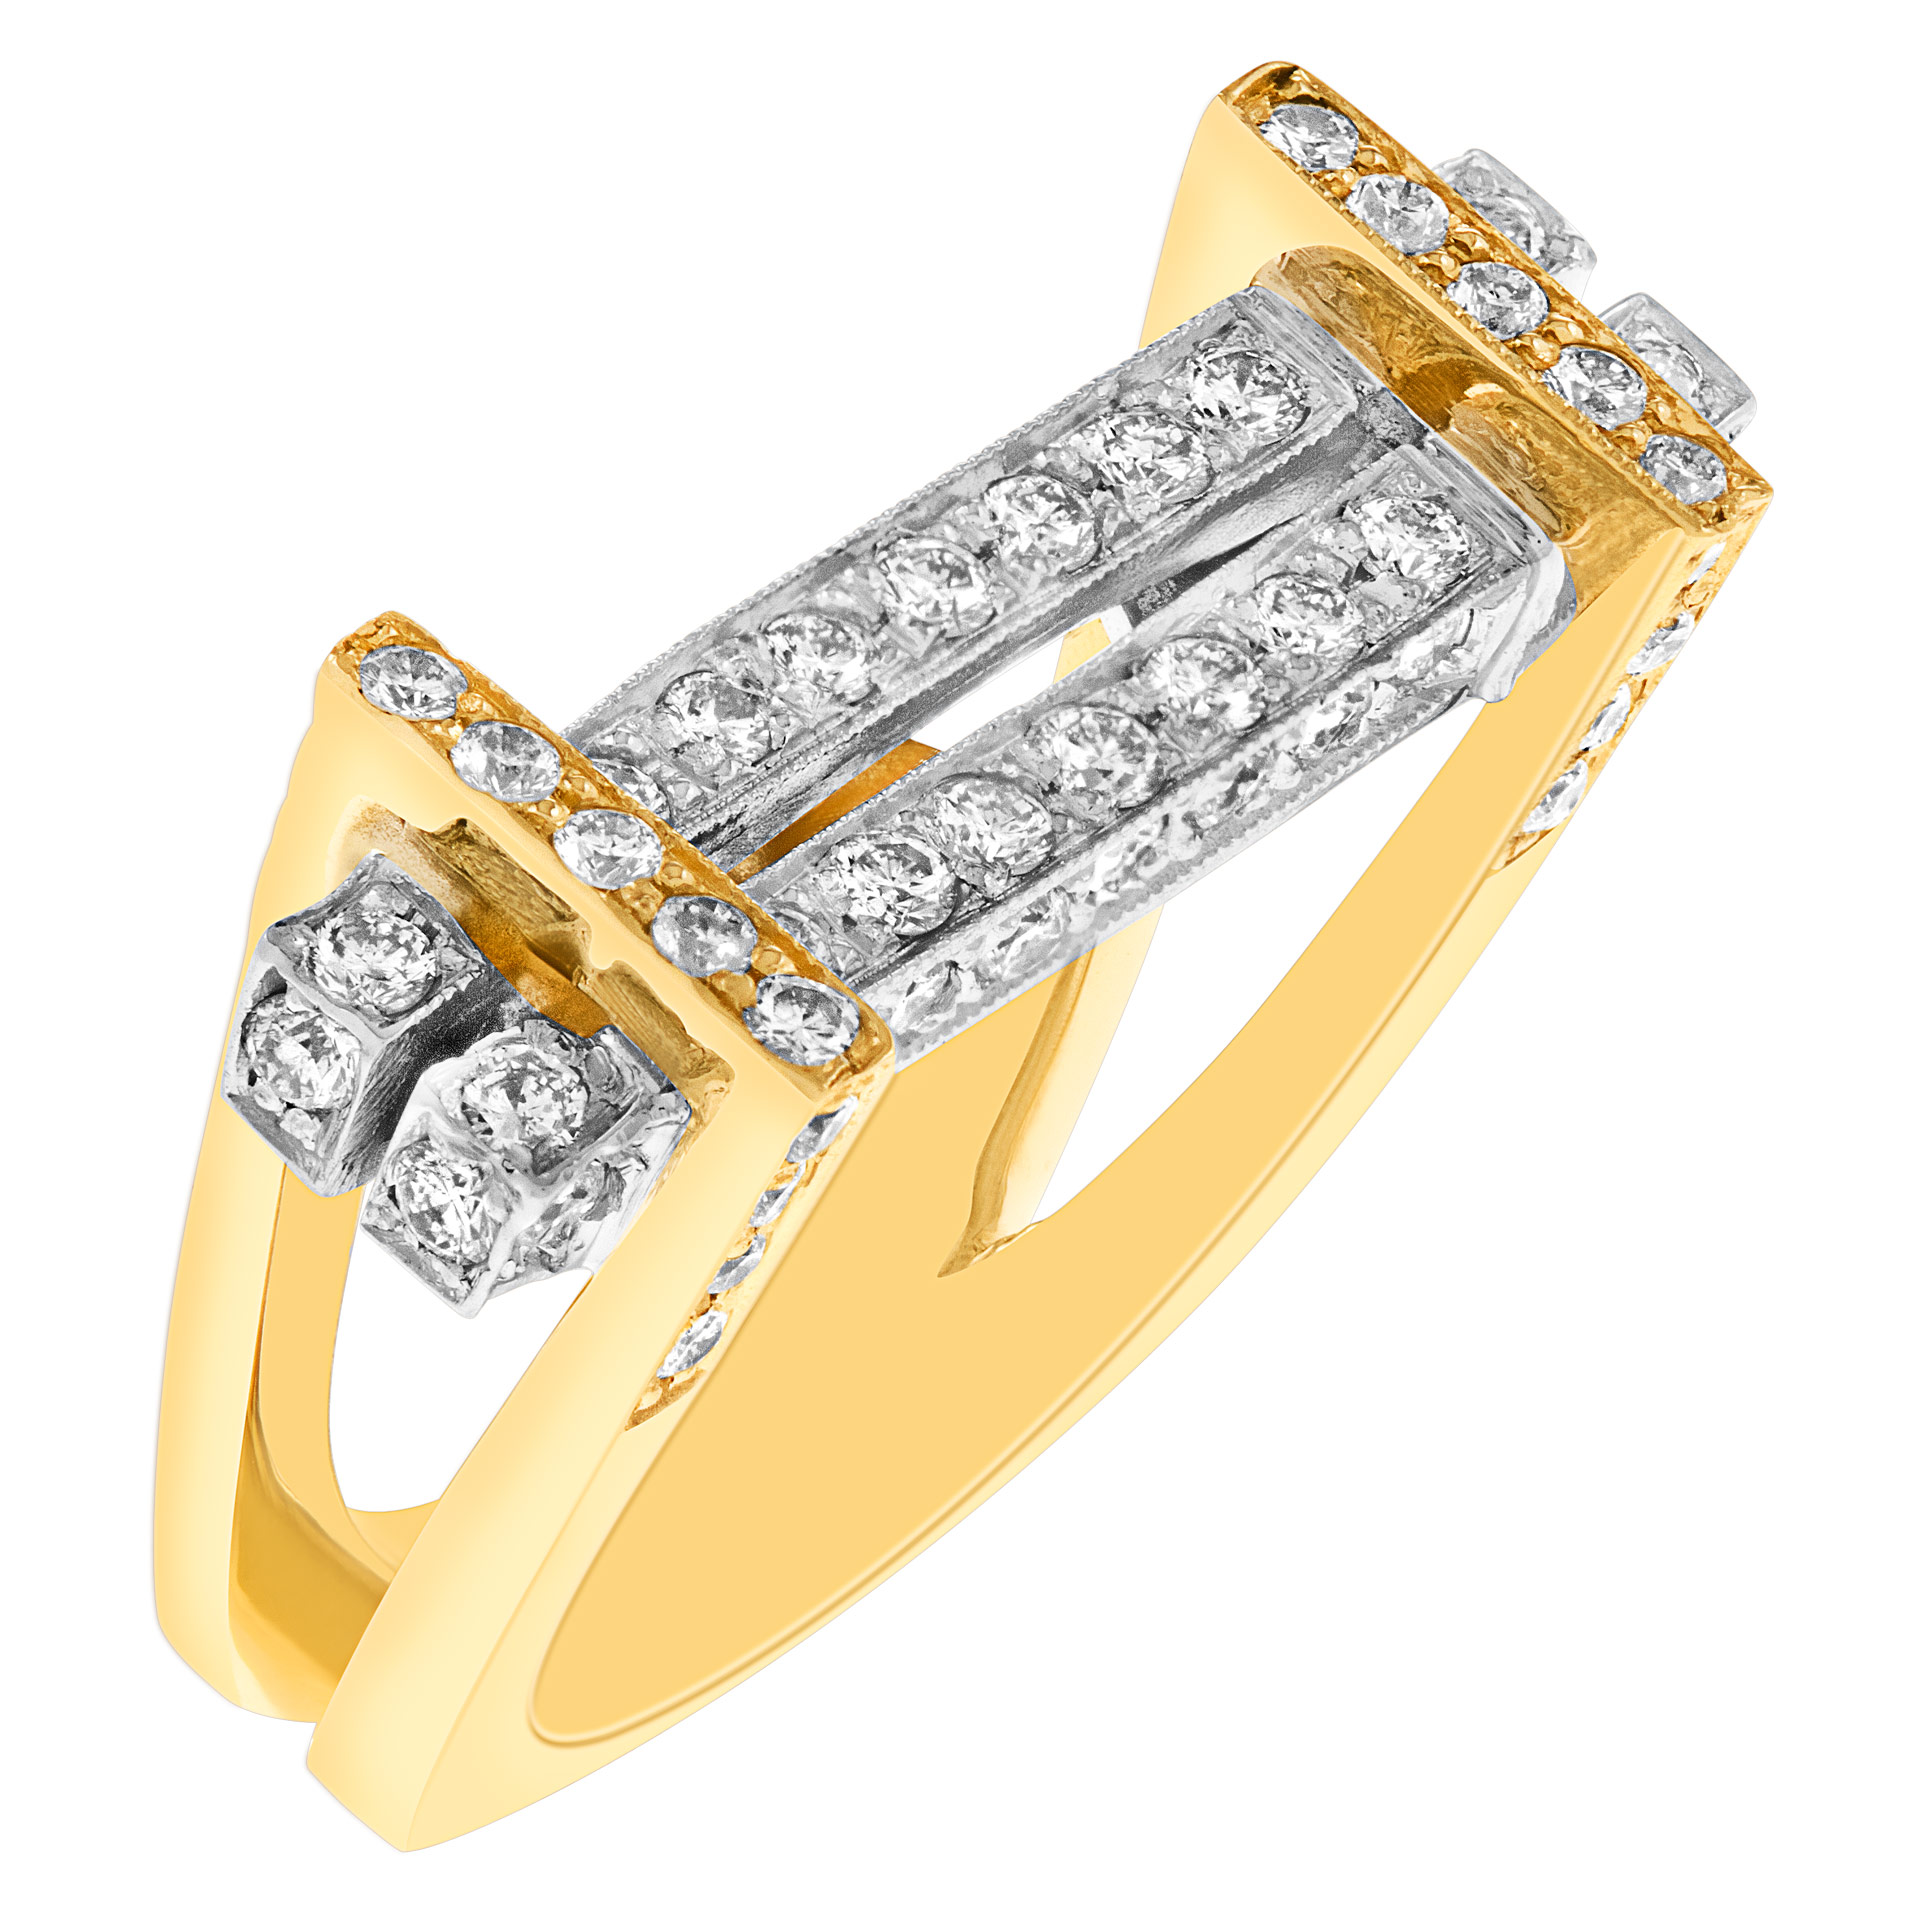 Diamond ring in 14k white and yellow gold image 2